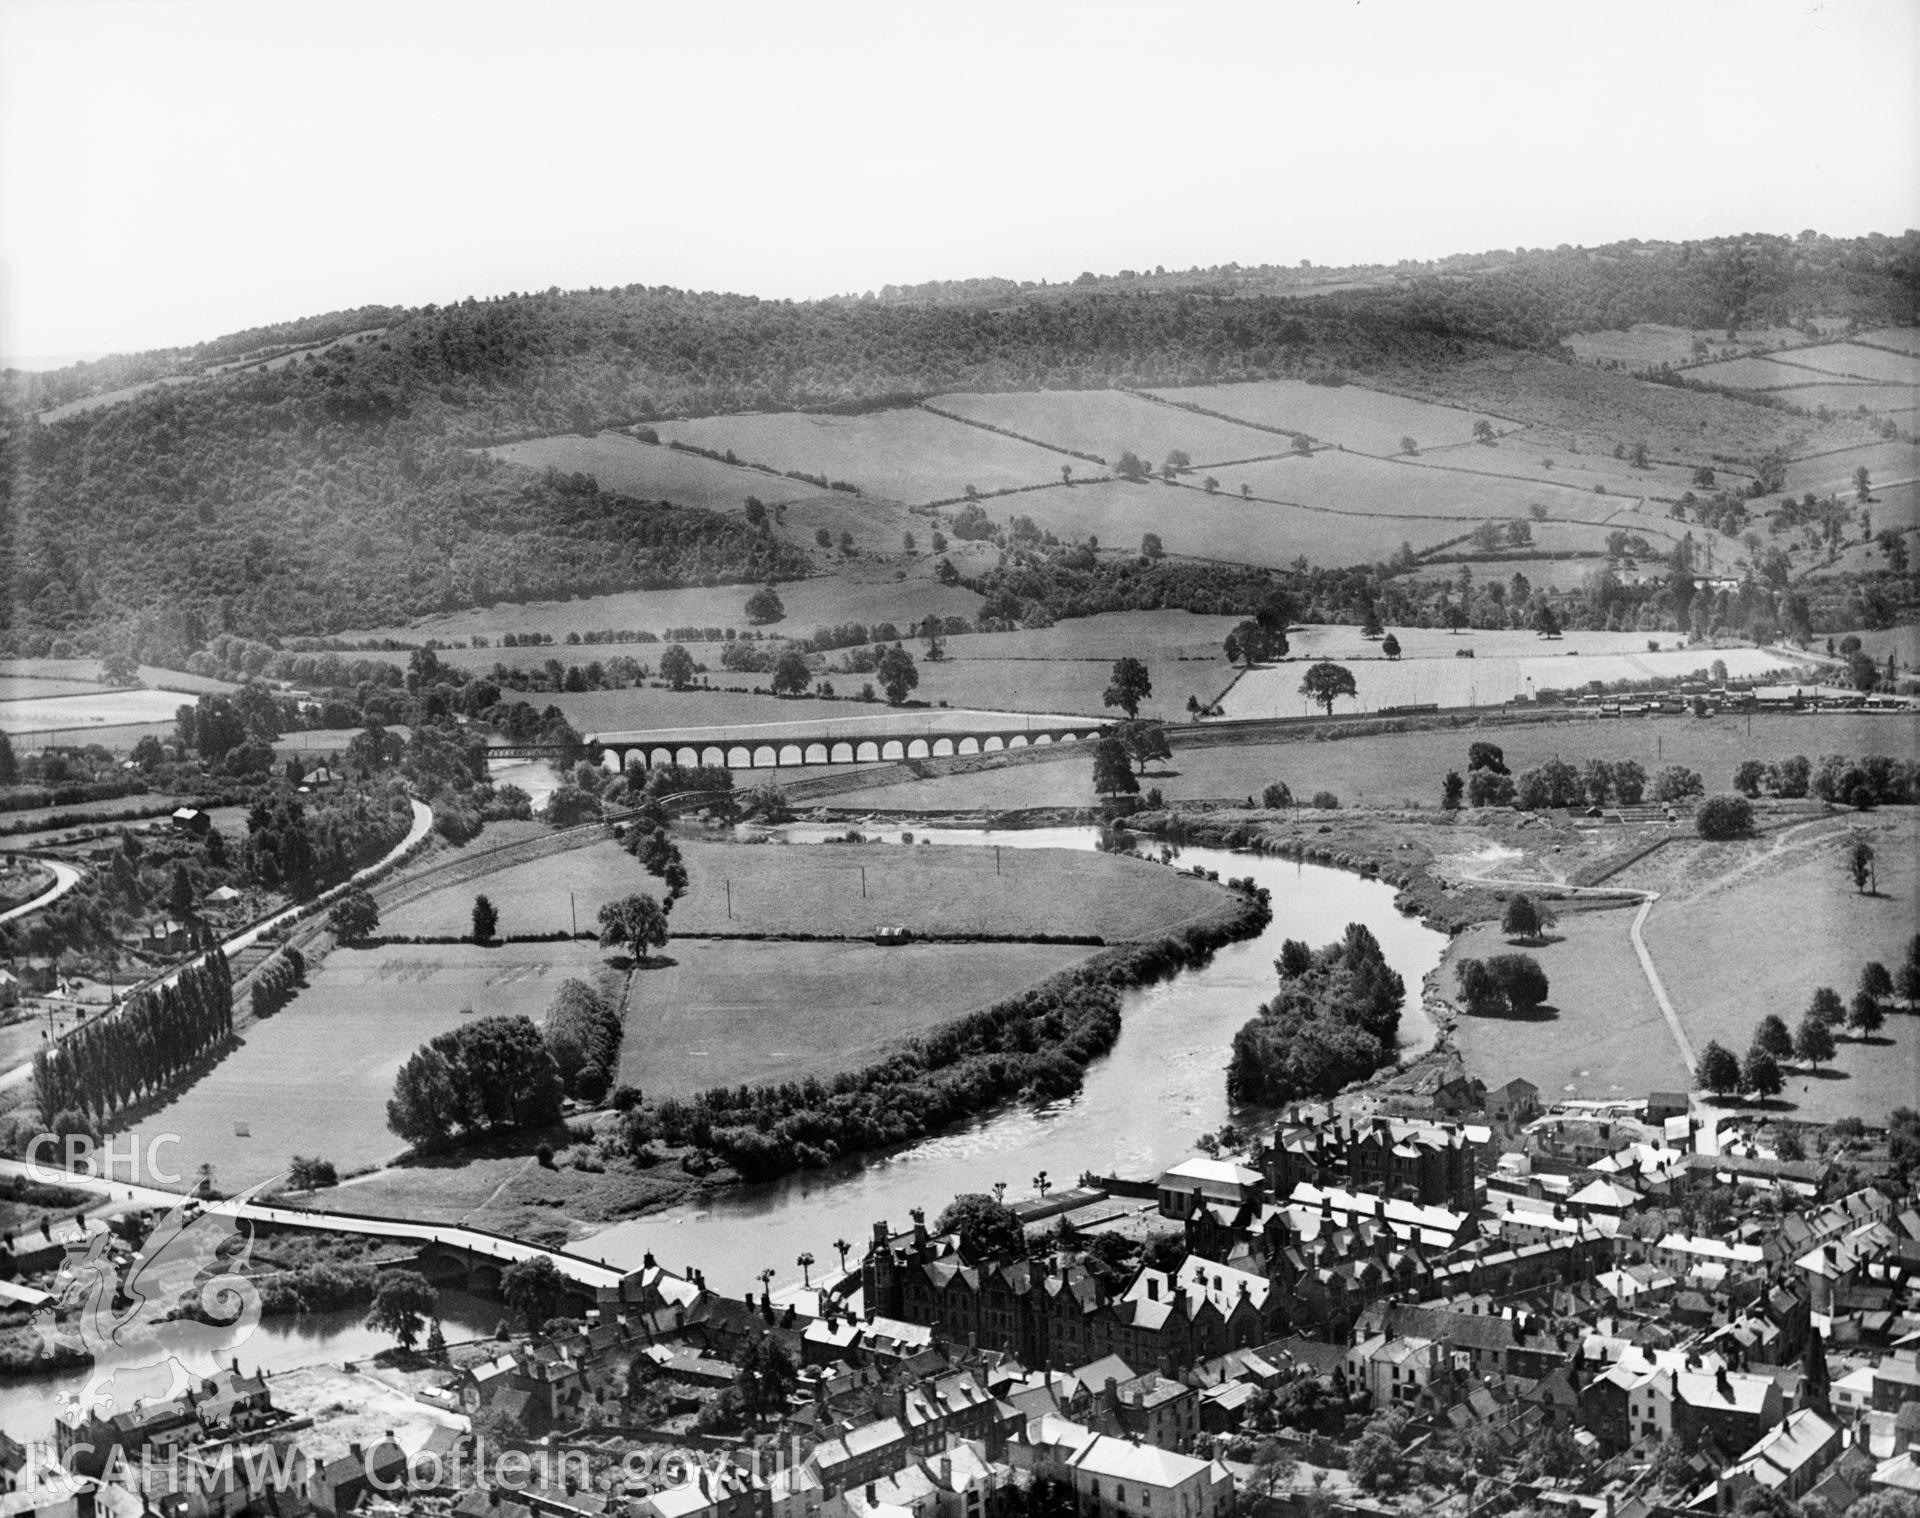 View of Monmouth showing school and viaduct, oblique aerial view. 5?x4? black and white glass plate negative.